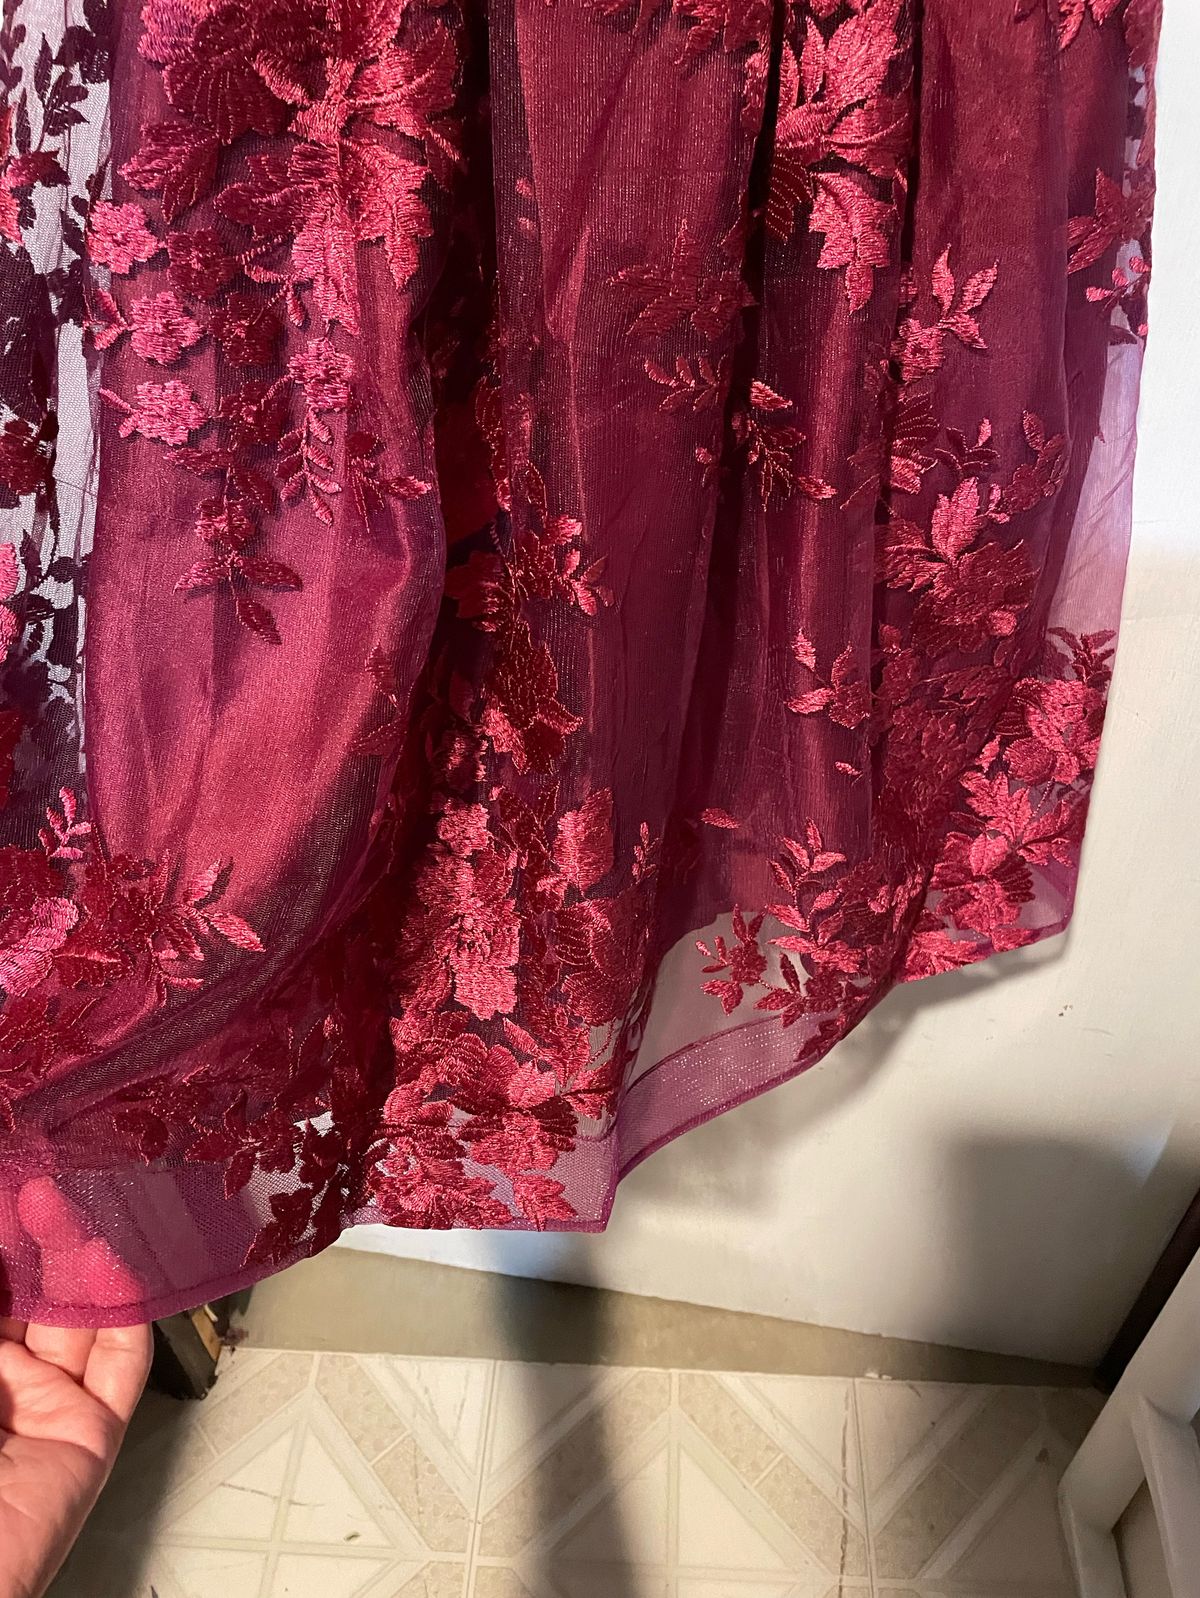 Size 2 Prom Plunge Burgundy Red A-line Dress on Queenly